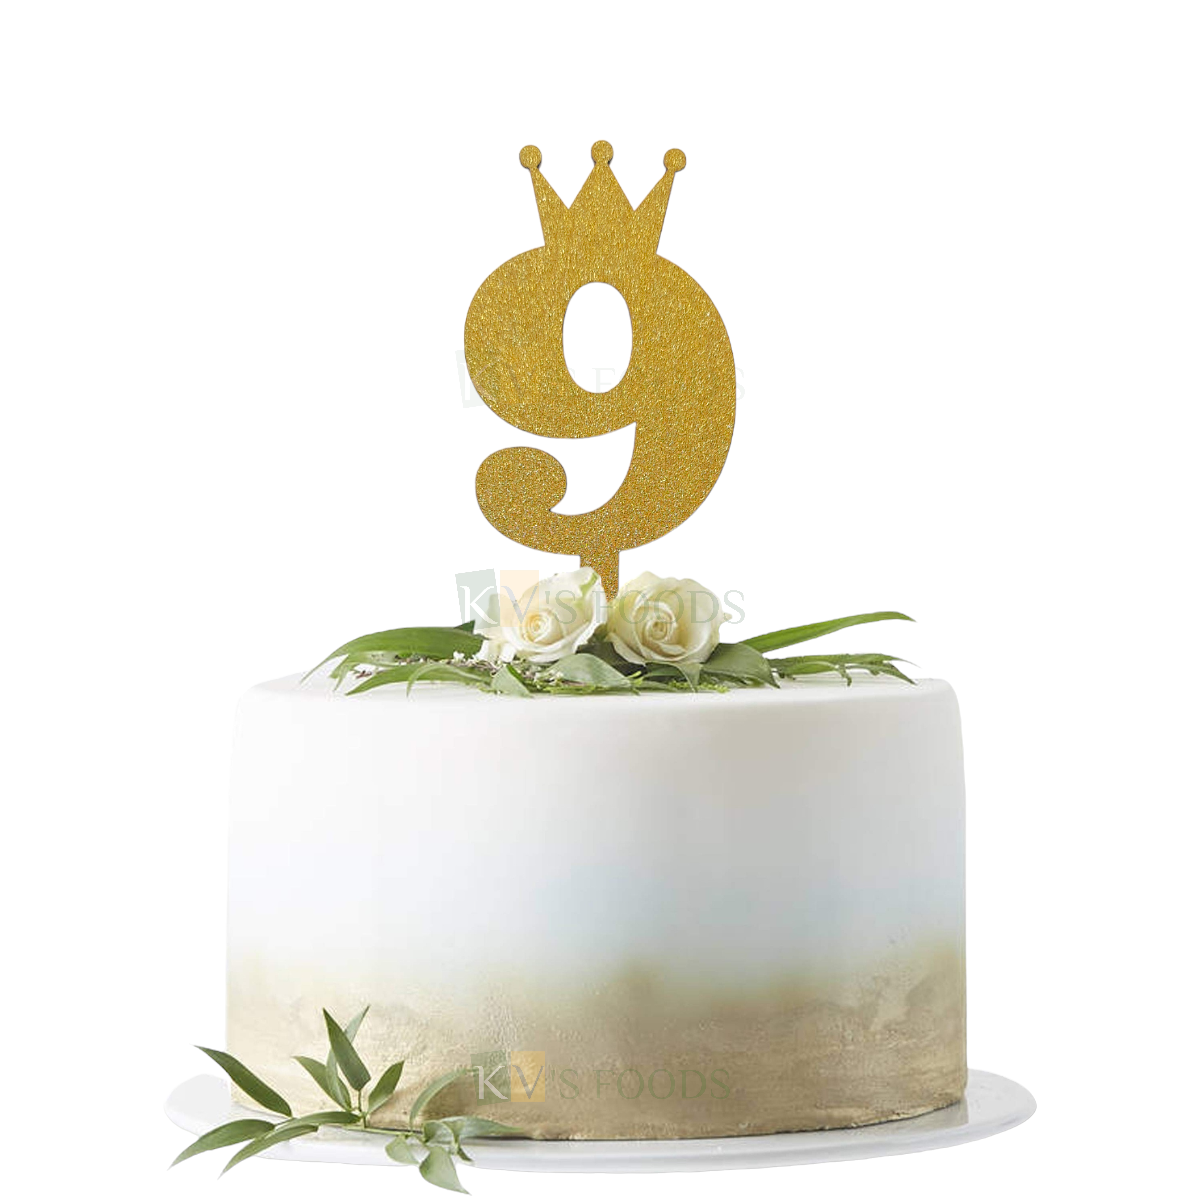 1PC Golden Shiny Glitter MDF 9 Number With Crown Cake Topper, Happy Birthday Theme, 9th Birthday Cake Topper, Nine Number Tiara Theme Cake Glitter Insert 9 Years Old Birthday DIY Cupcake Decorations